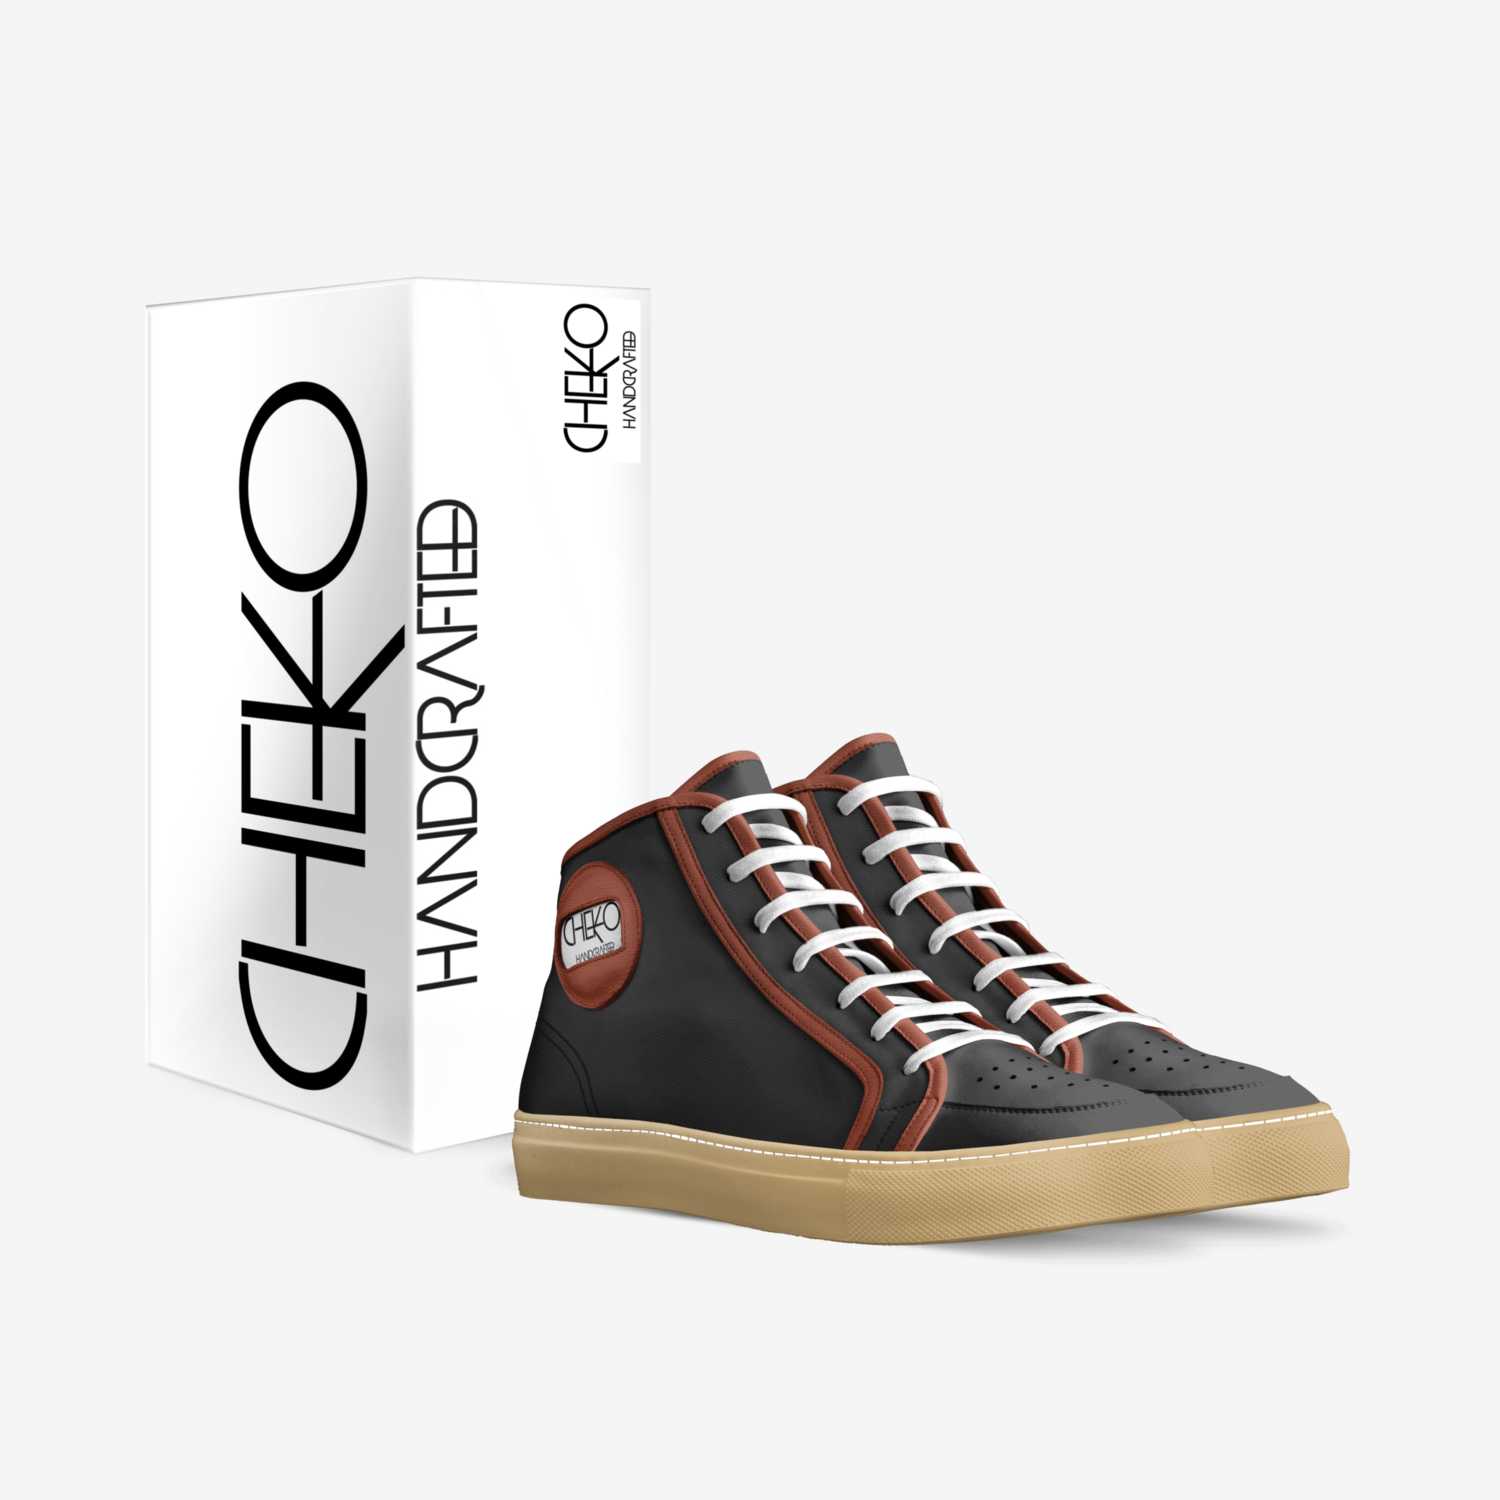 CHEKO HANDCRAFTED SHOE custom made in Italy shoes by Alfredo Checo | Box view